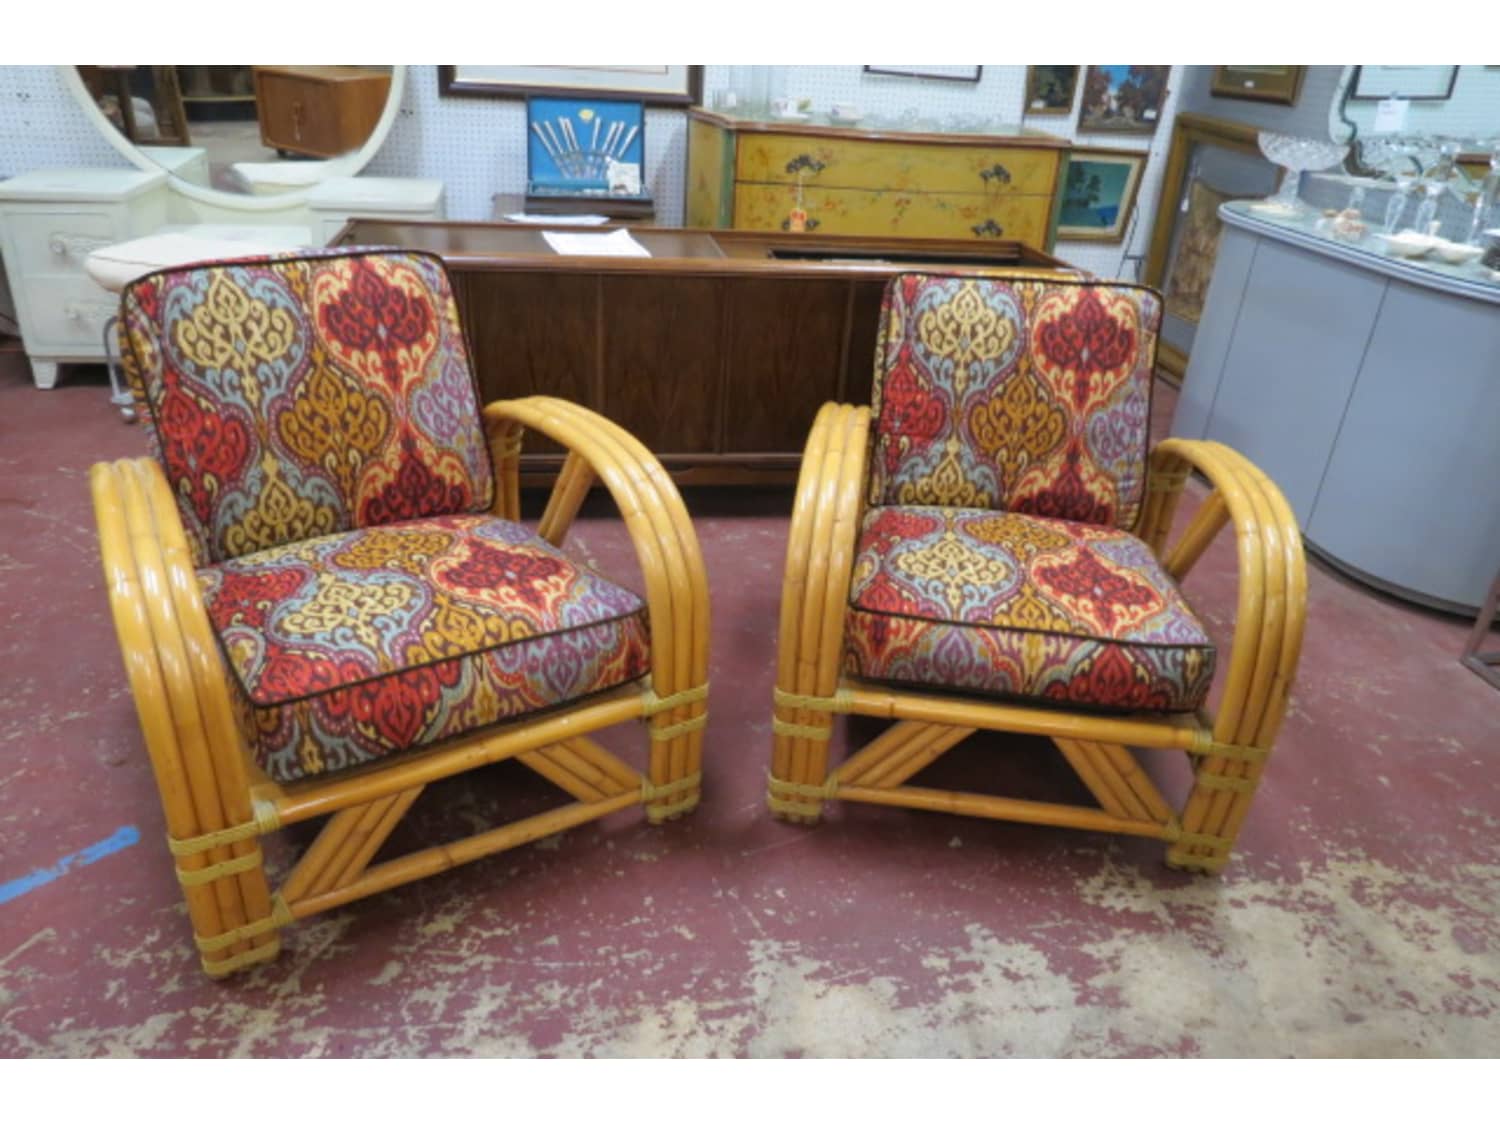 SALE! Vintage Mid century 2 bamboo lounge chairs - Apartment Therapy's